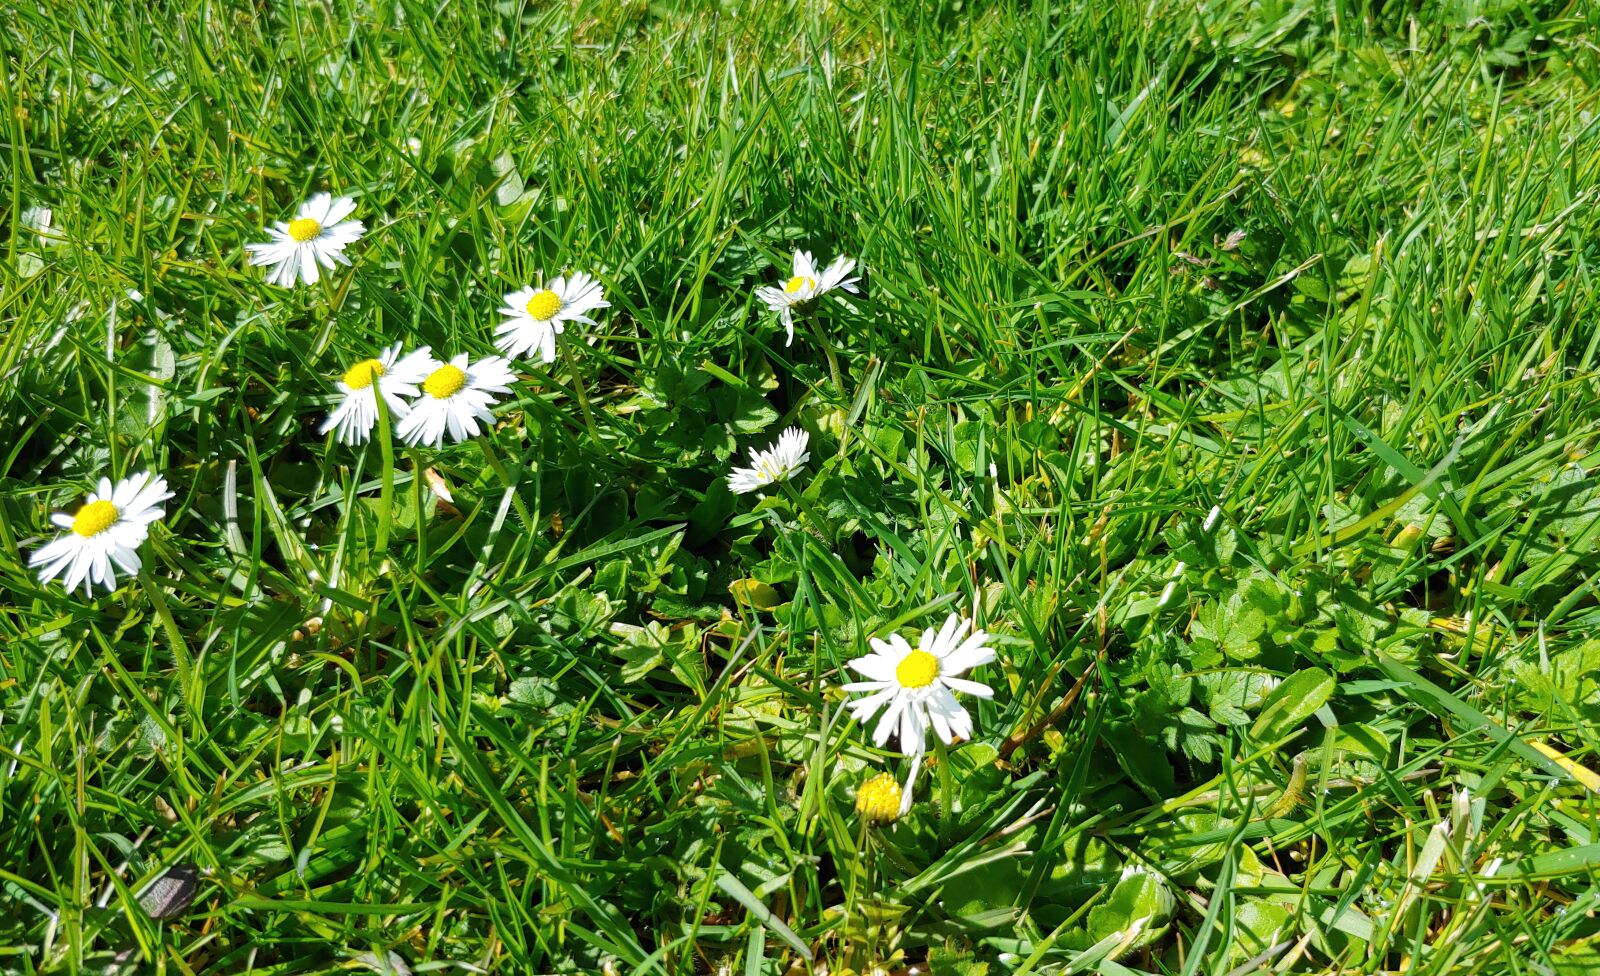 LG G7 THINQ sample photo. Flowers, meadow, white photography